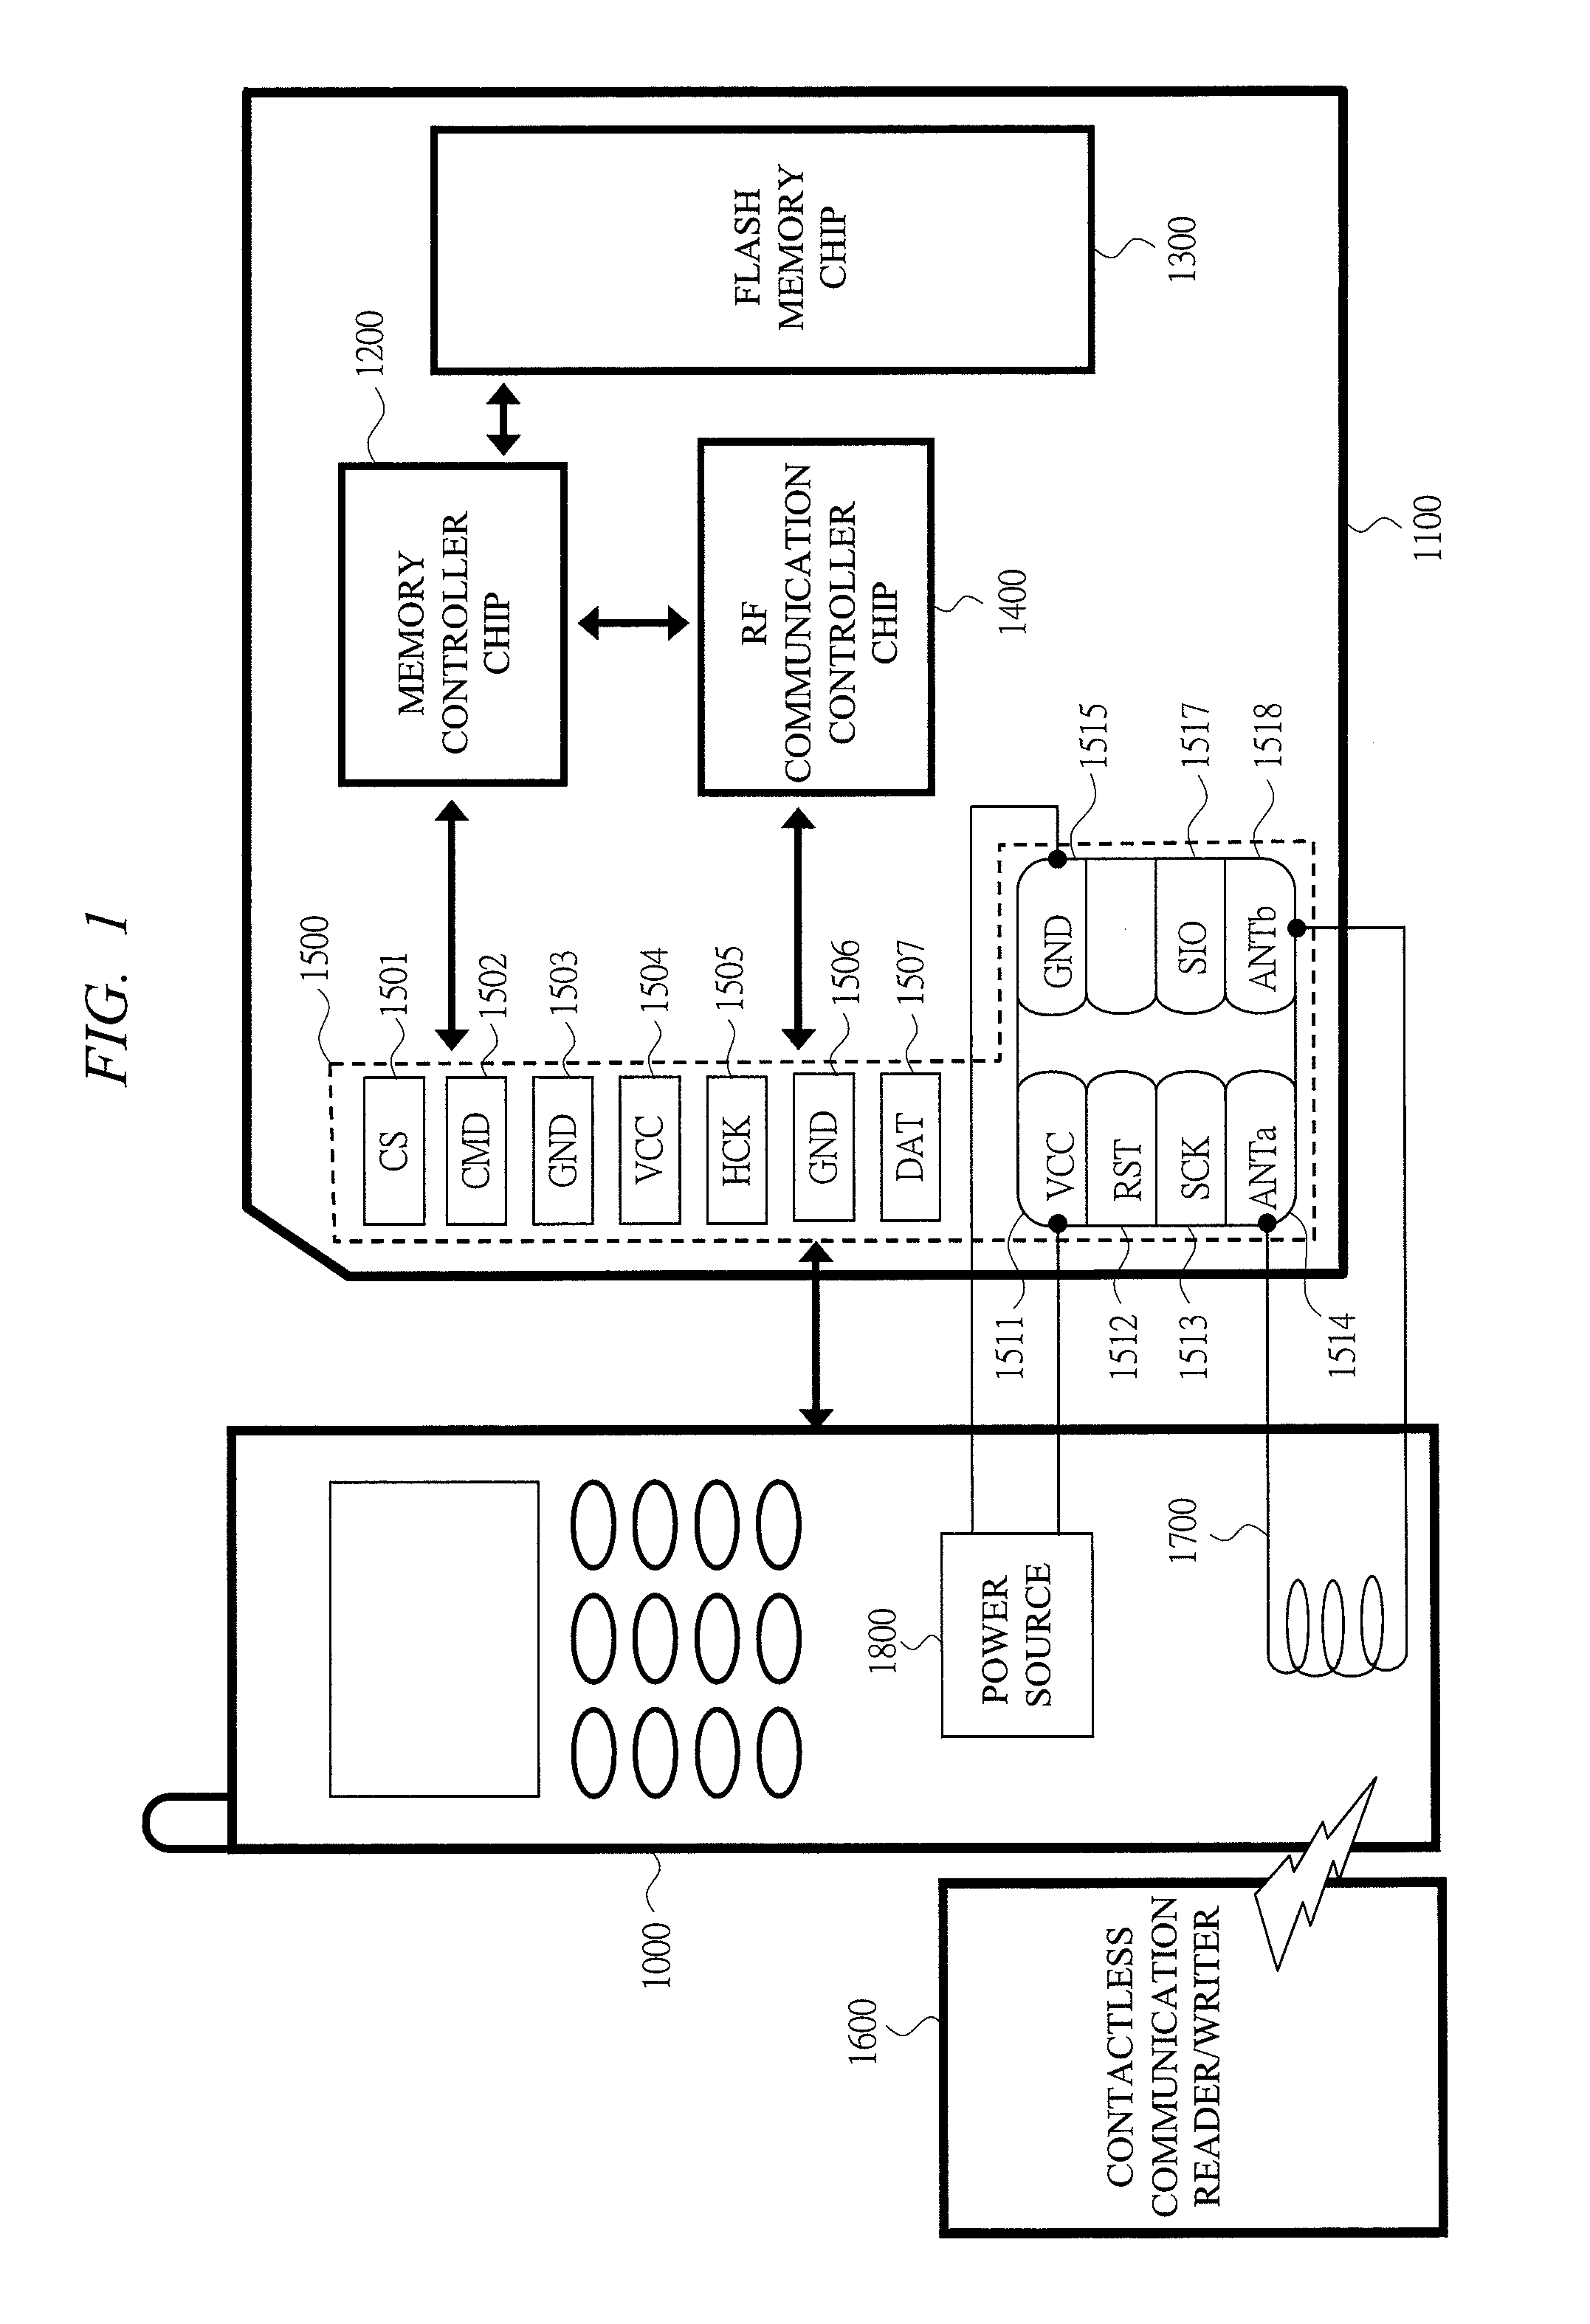 IC module and cellular phone